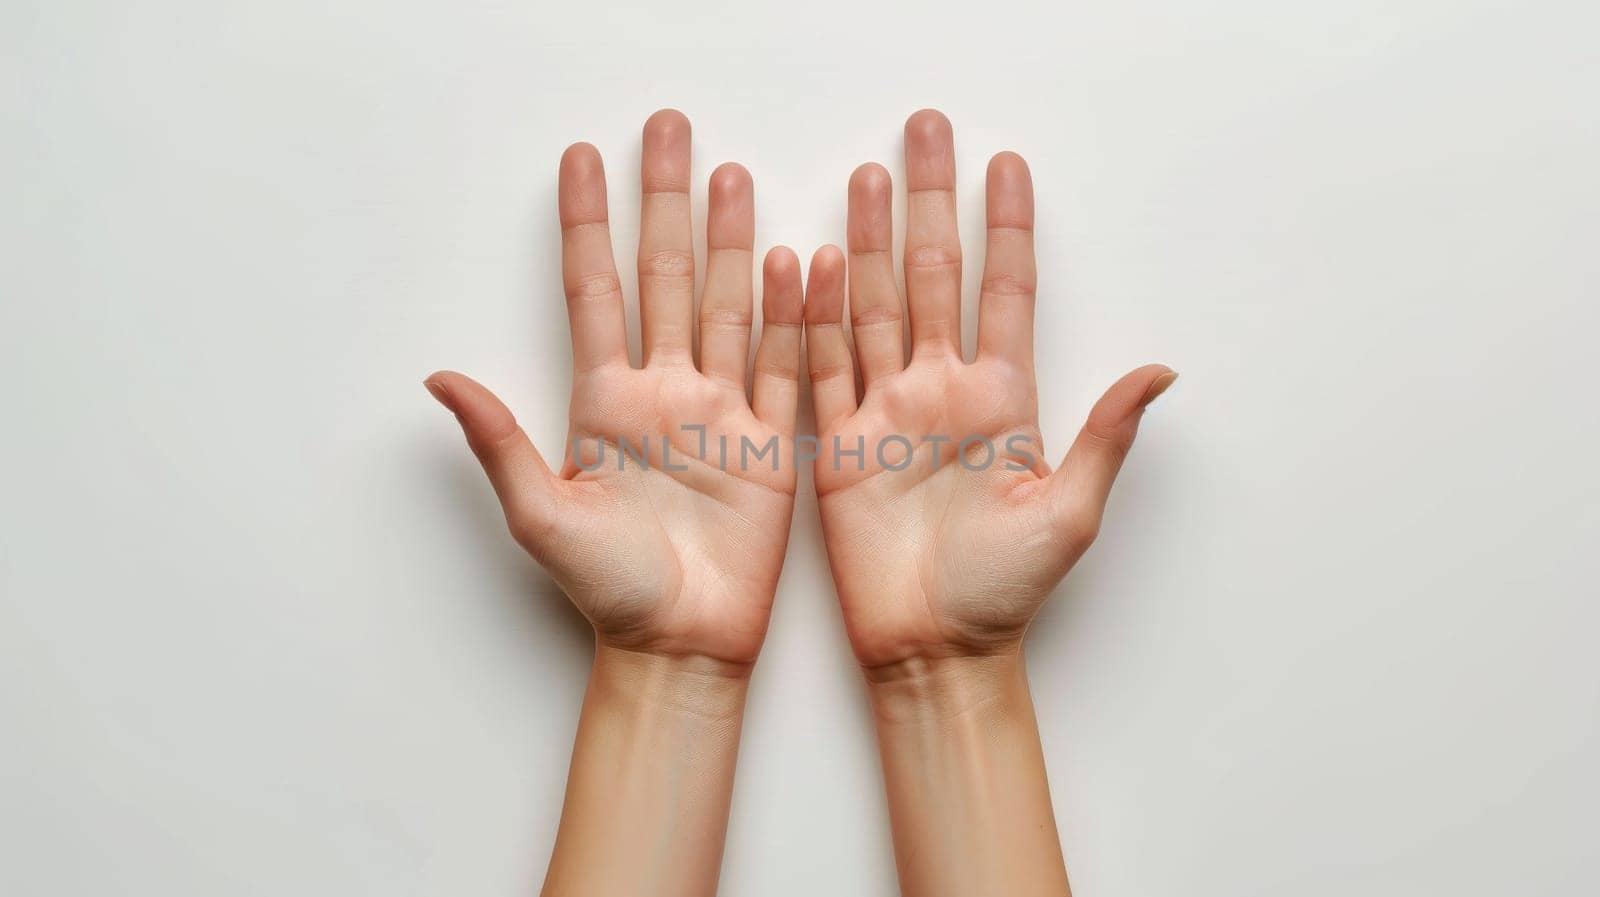 Two hands with nails painted in a light pink color. The hands are positioned in a way that they are facing each other, with the fingers spread apart. Scene is one of relaxation and carefree enjoyment